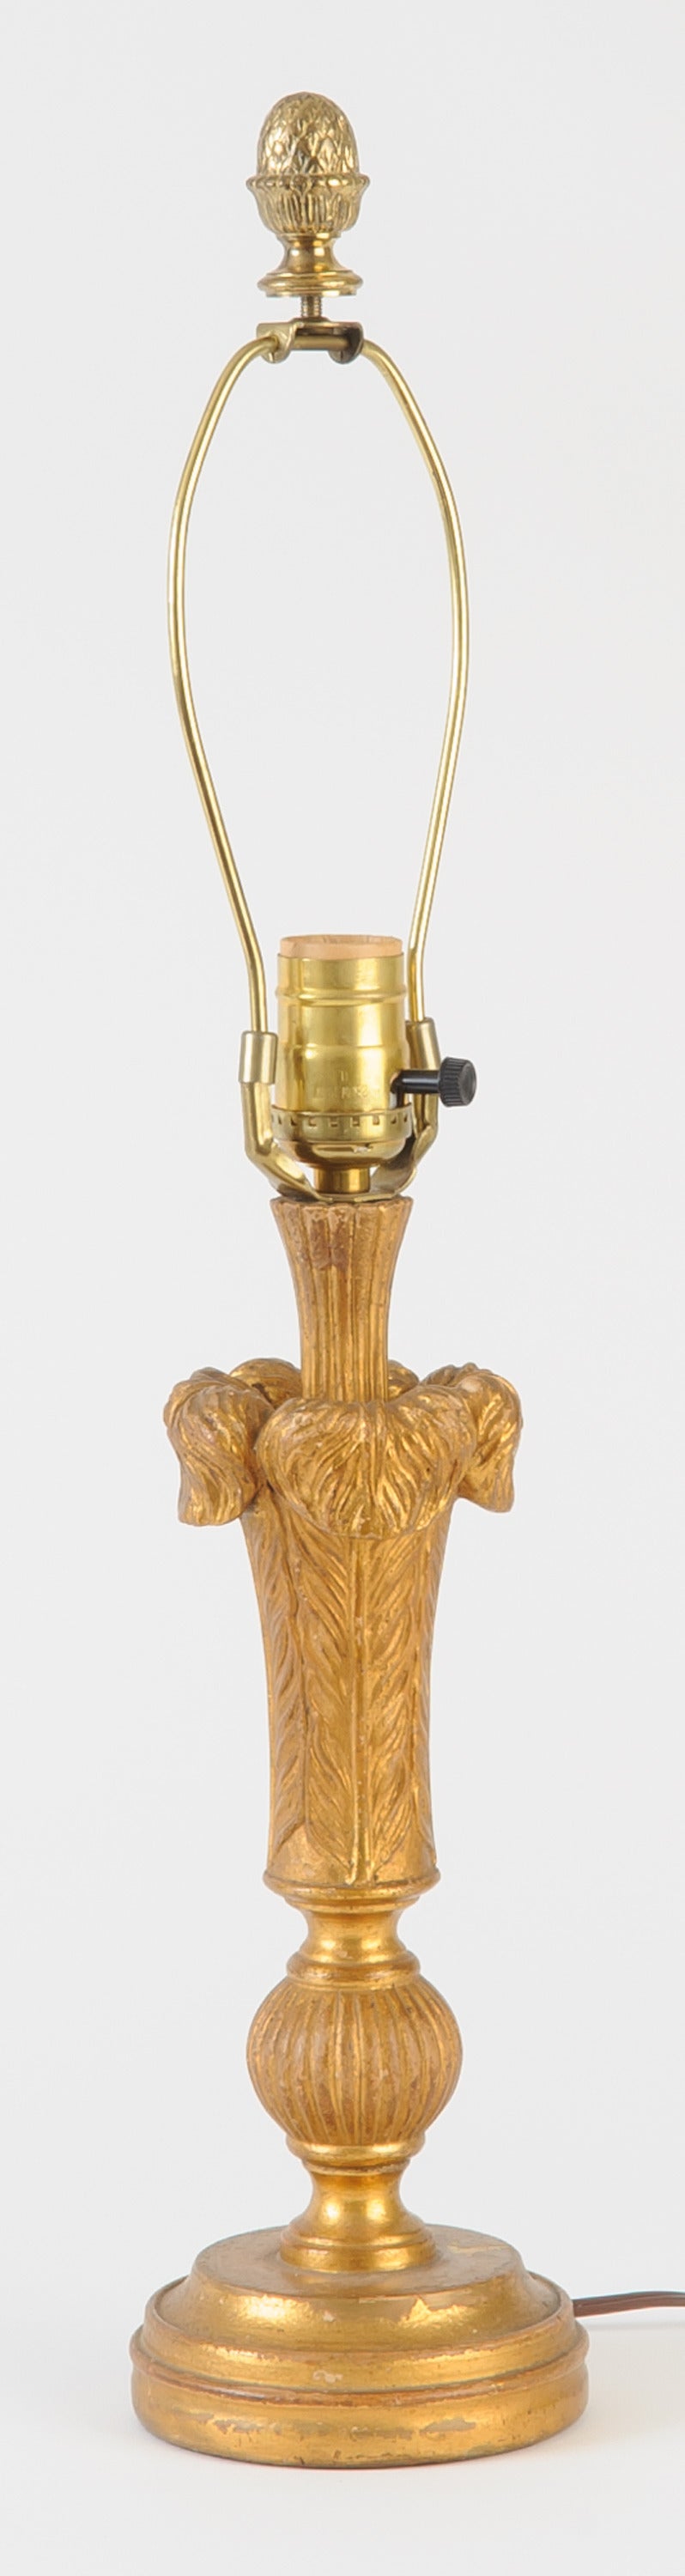 Borghese gilded wood candlestick lamp.  The shade is handprinted with leaf rope pattern.  The Borghese firm reproduced decorative objects until 1940.  The company was known for their electic selection of molded plaster figurines, wood and gilded